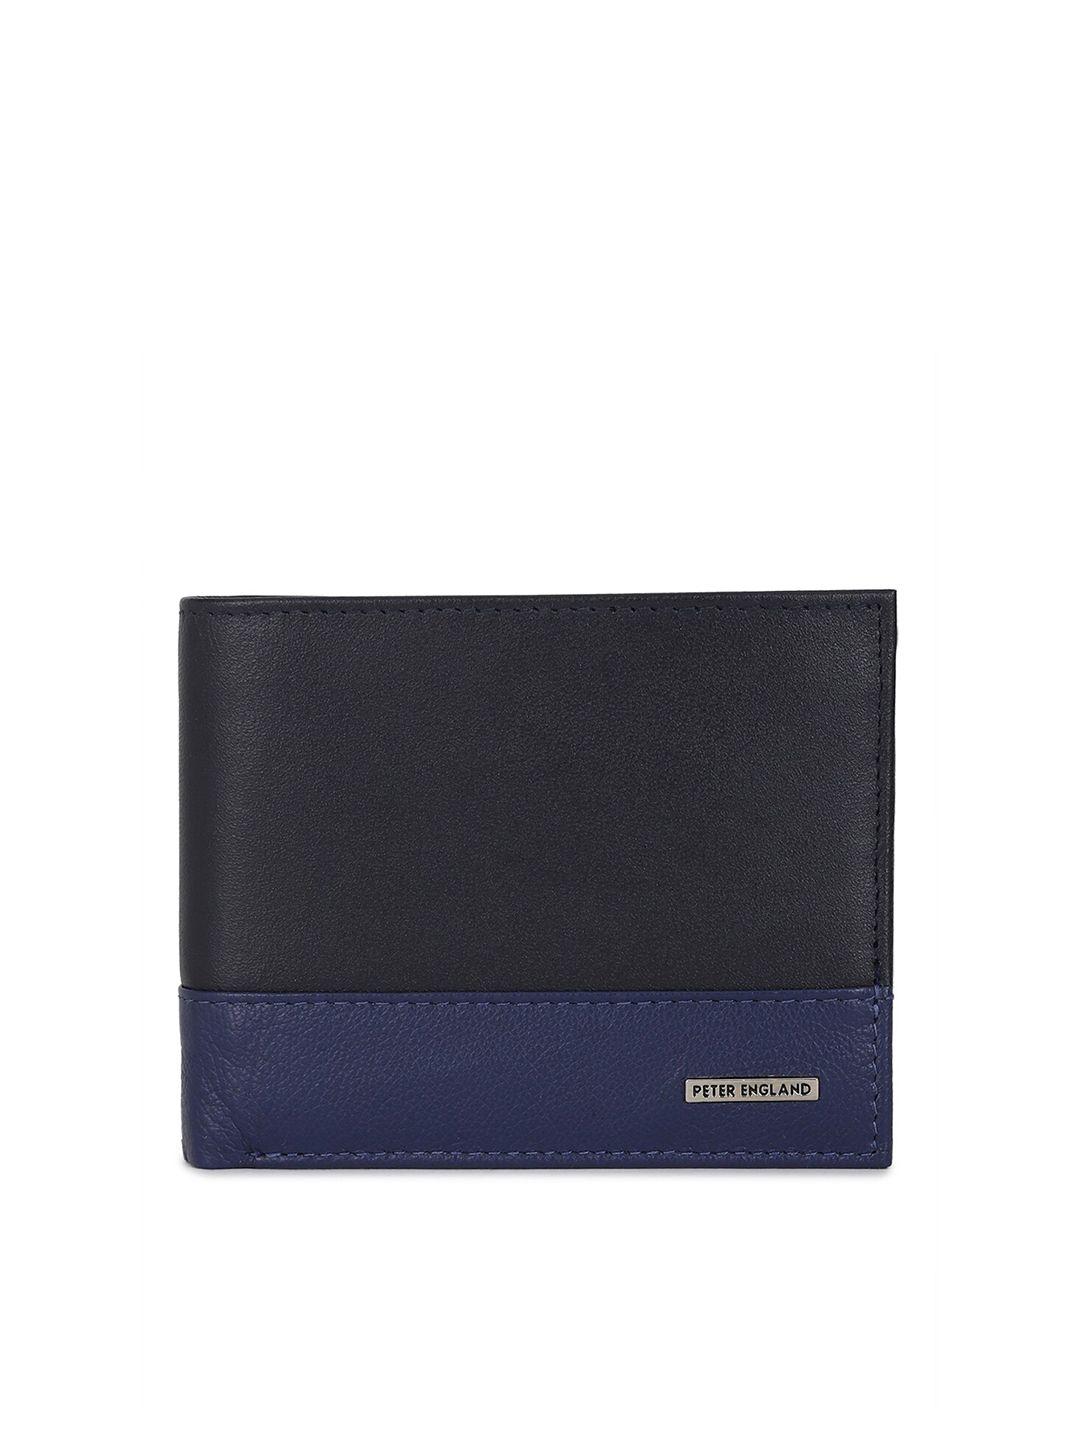 peter england men navy blue & black colourblocked textured leather two fold wallet